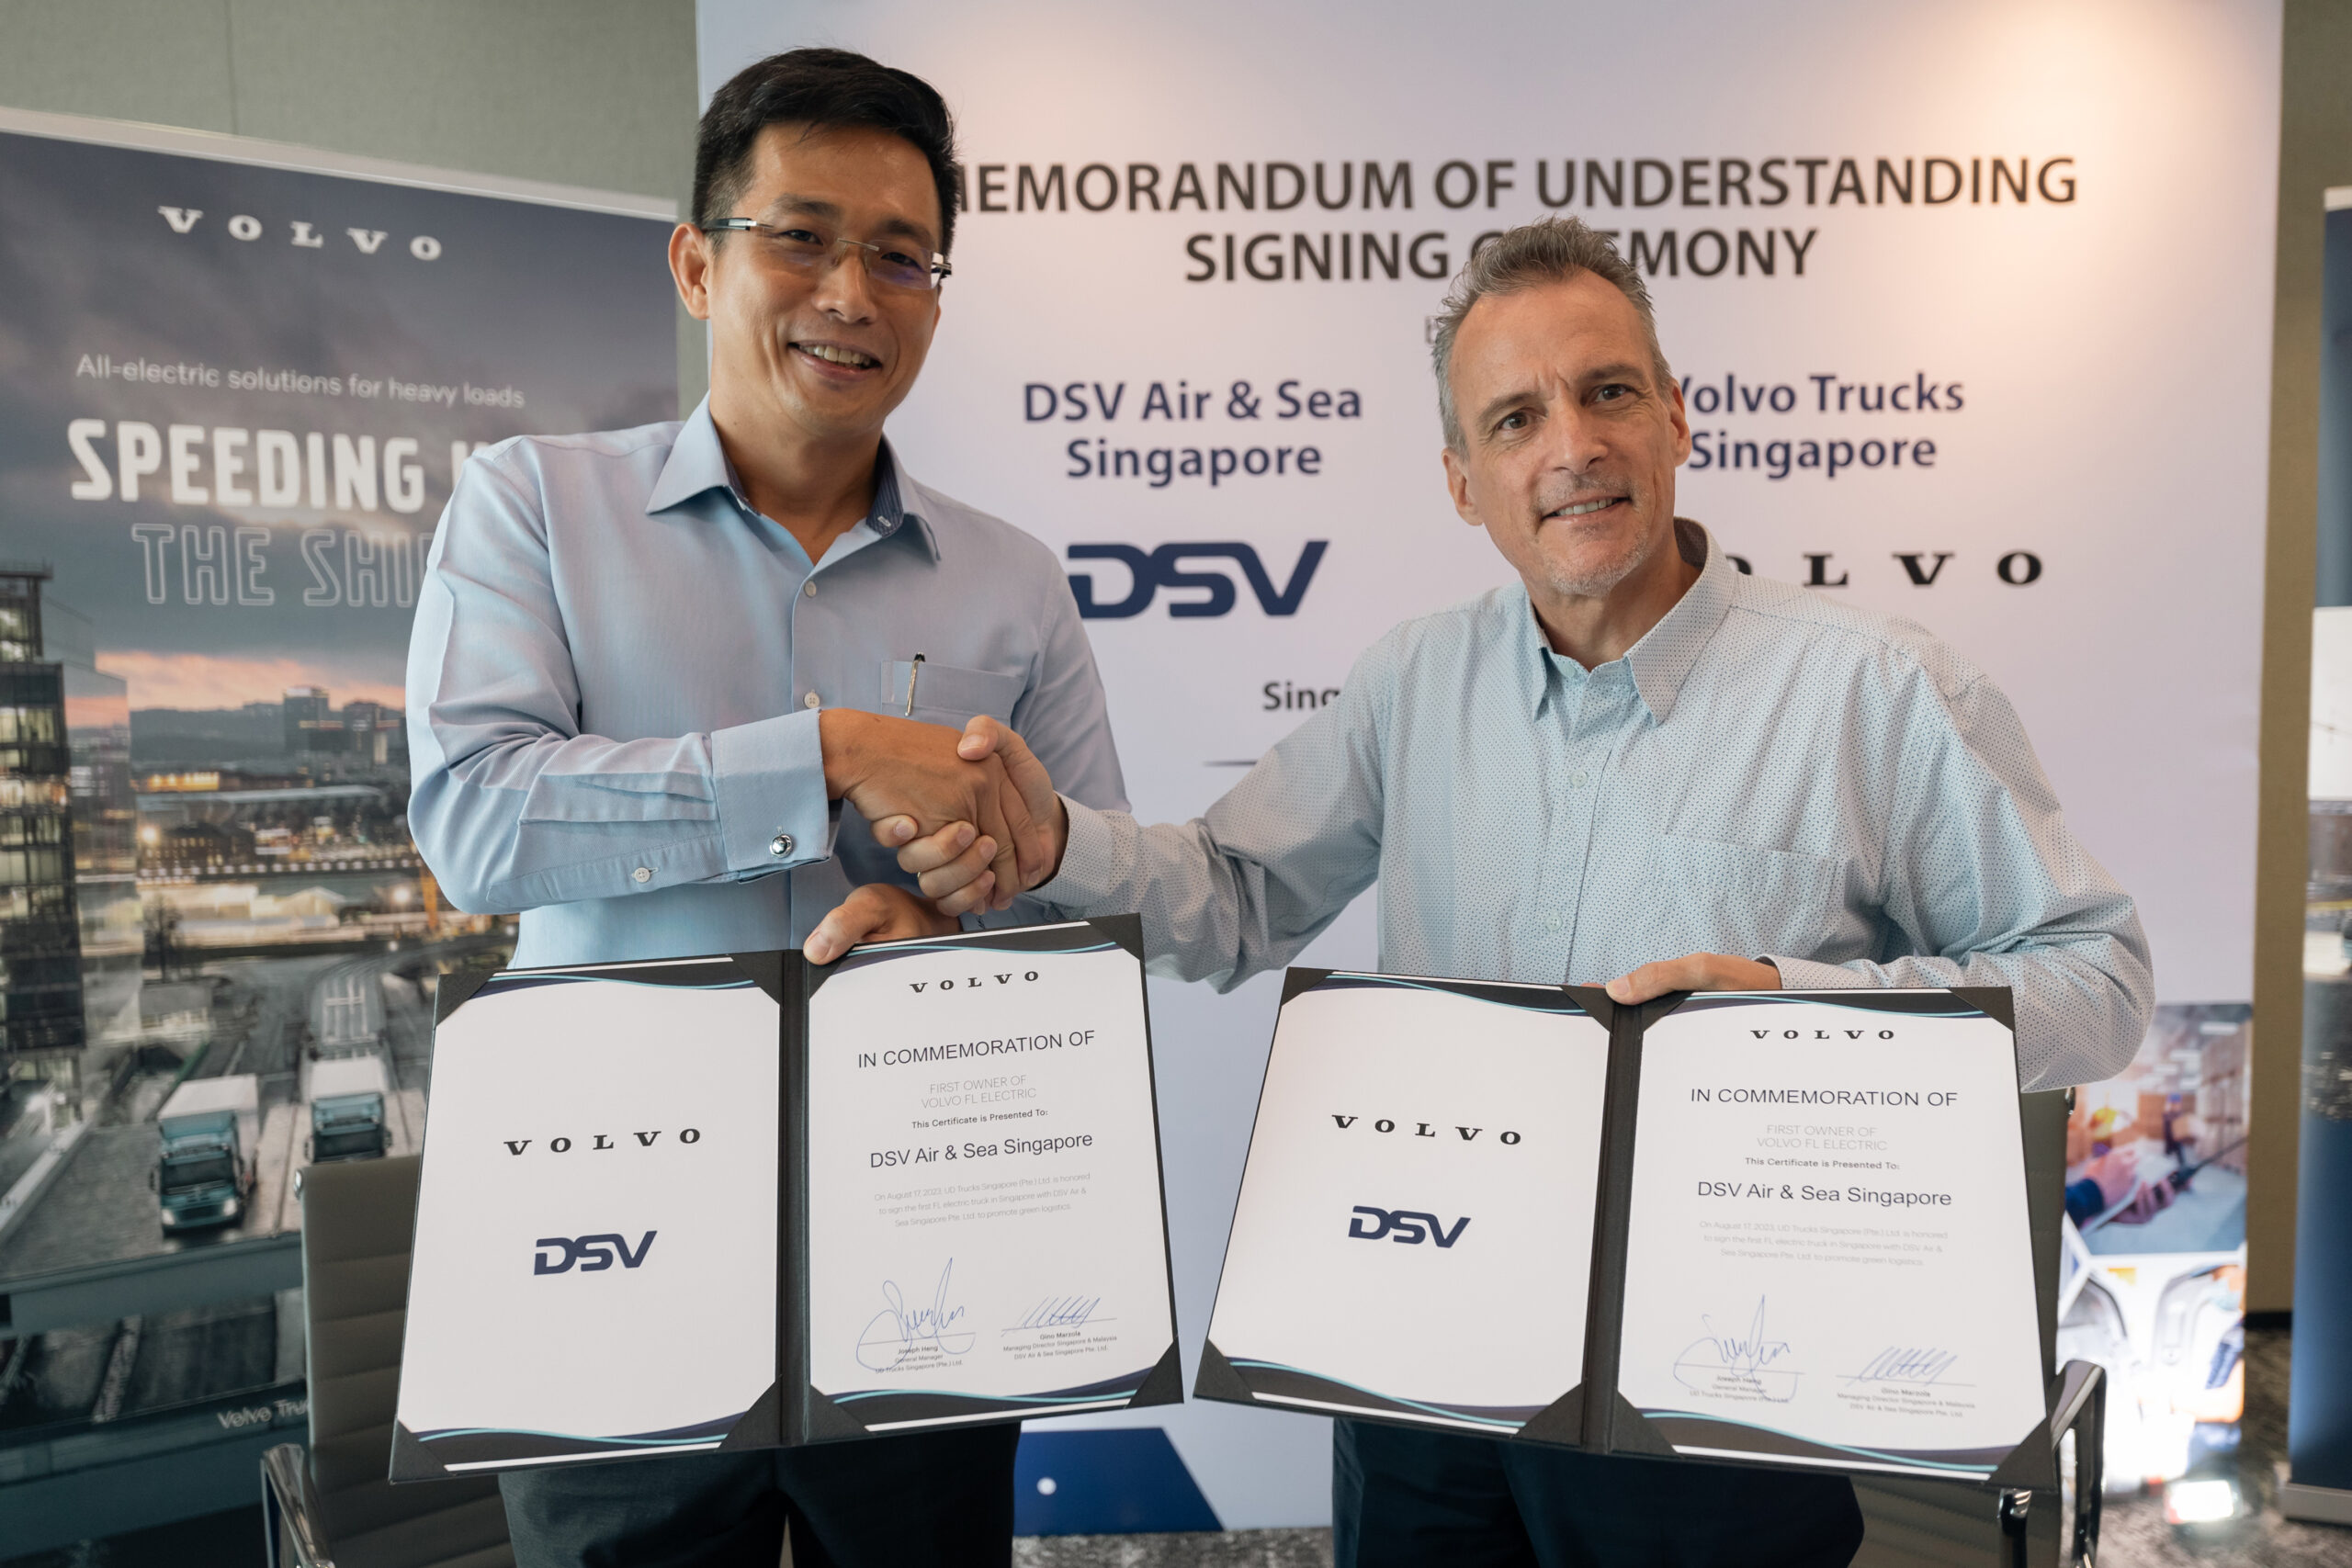 VOLVO TRUCKS SIGNS THE MOU FOR FIRST ELECTRIC TRUCK WITH DSV AIR & SEA SINGAPORE